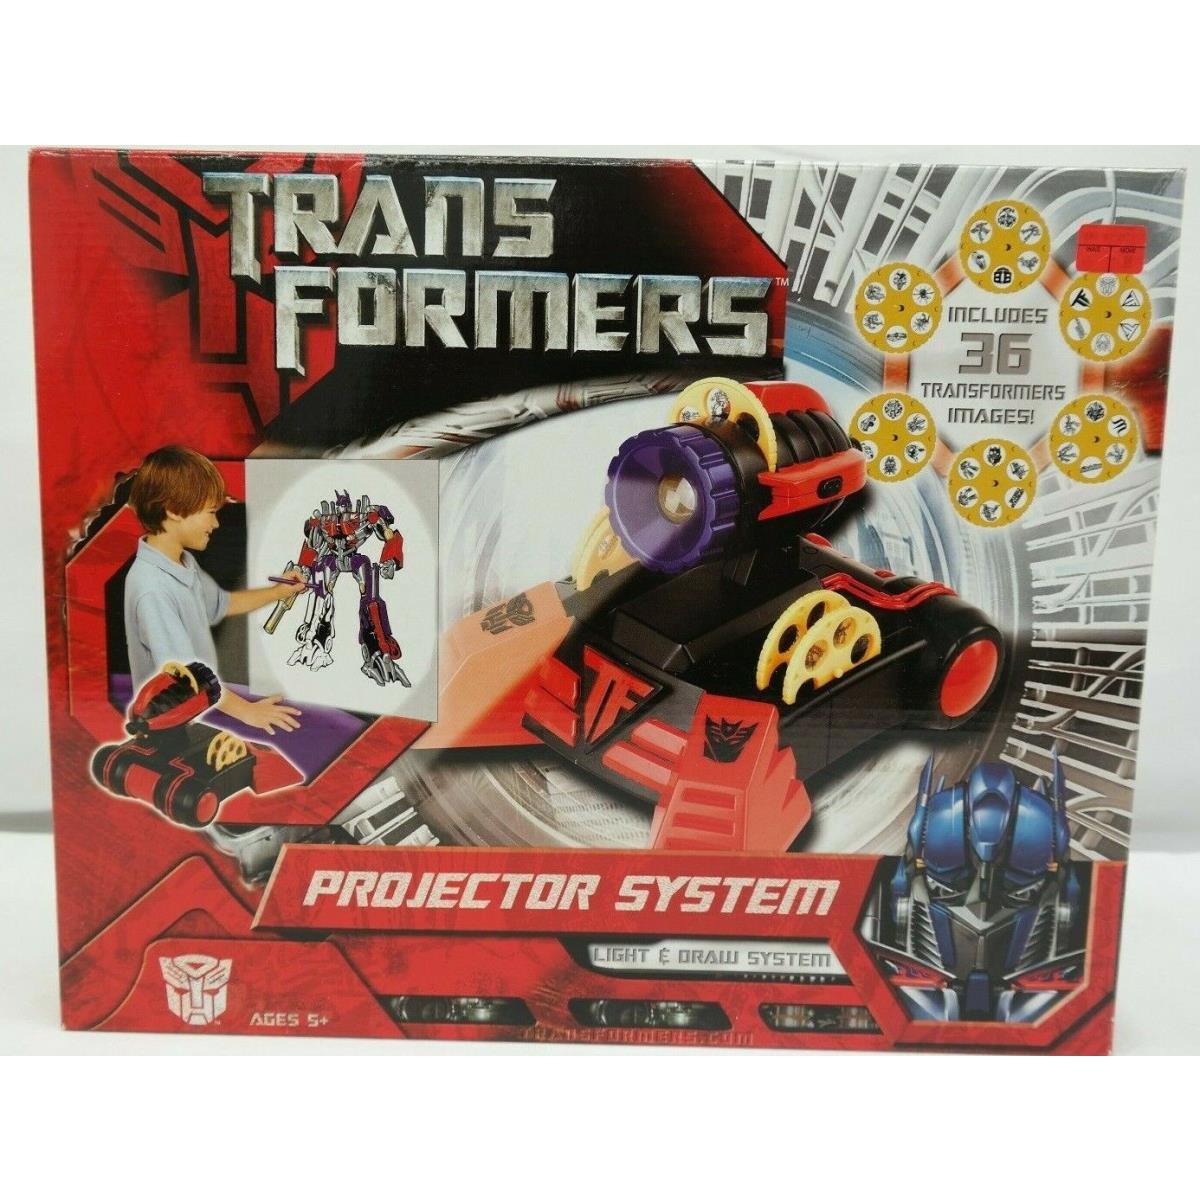 Transformers Projector System Light Draw System TY